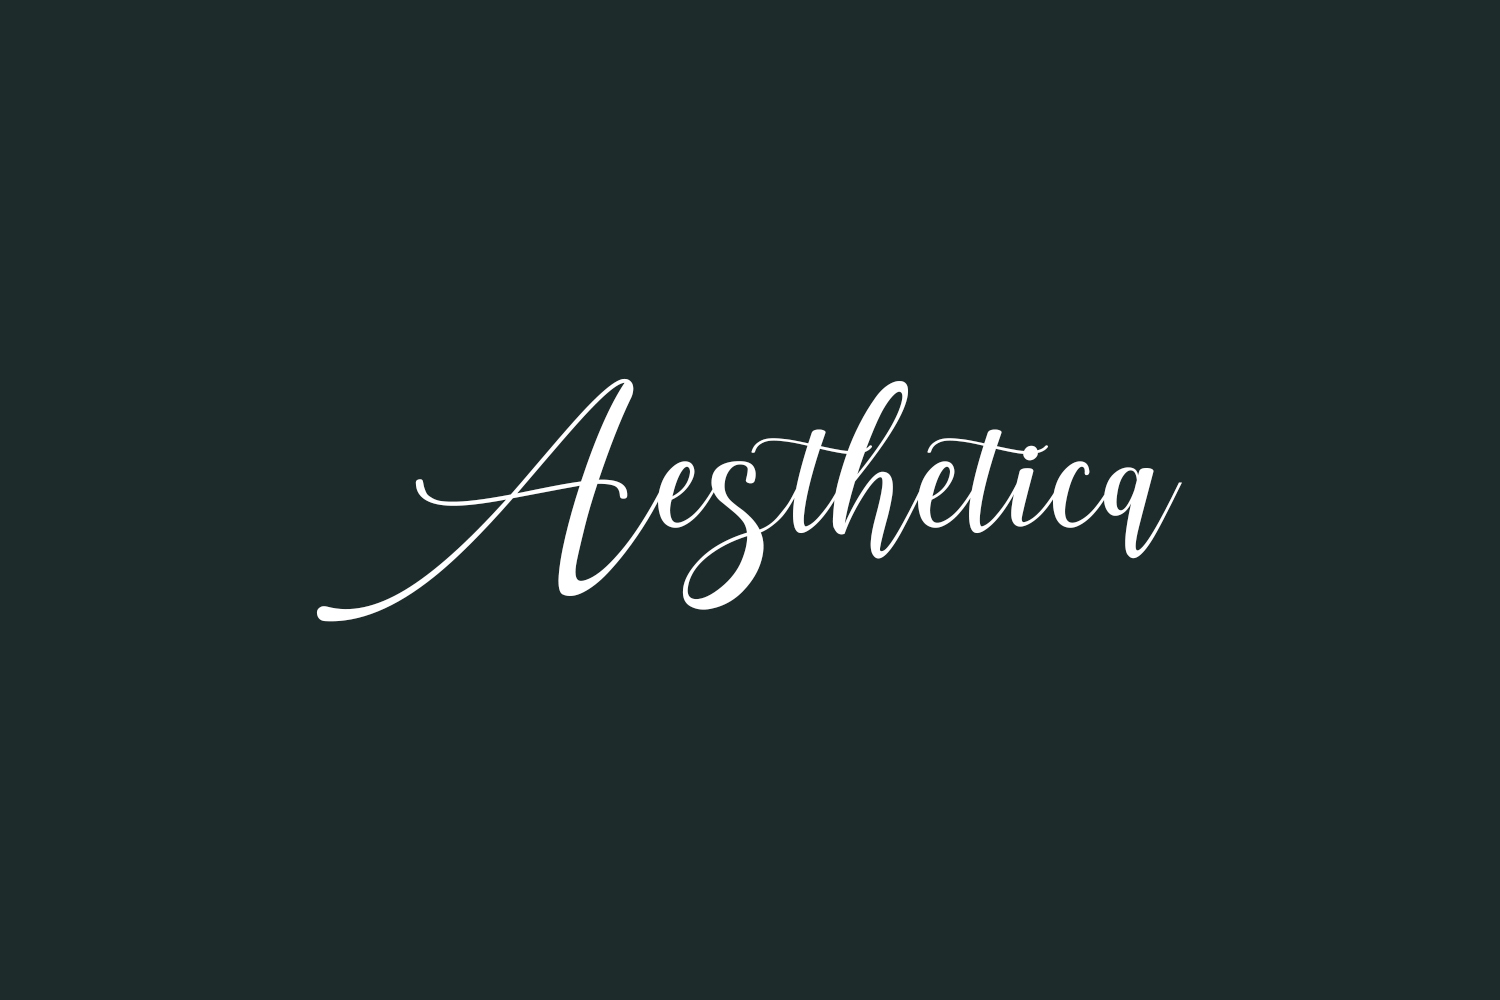 Aesthetica Free Font